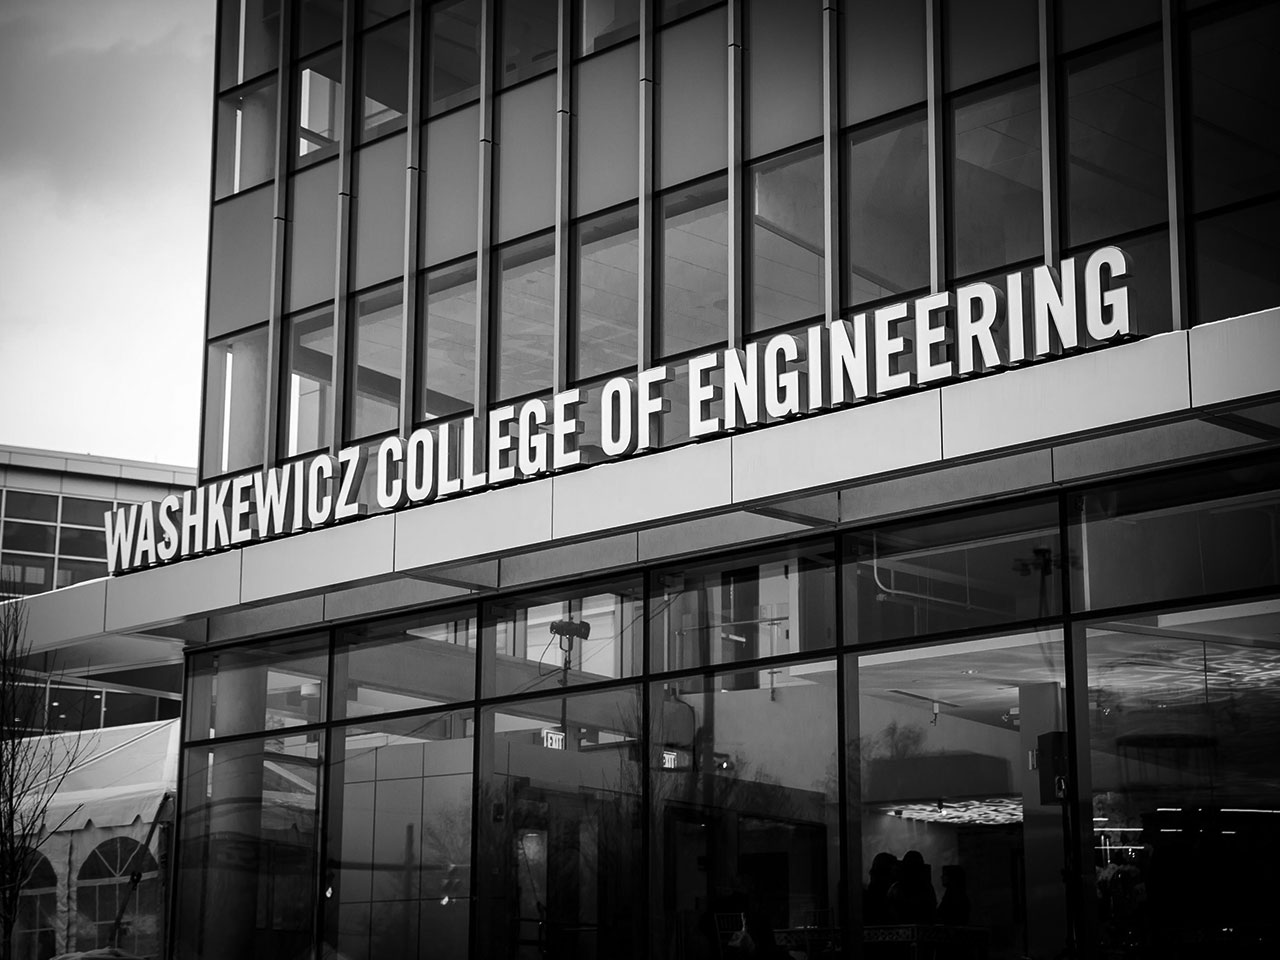 A photo of the exterior of Donald E. Washkewicz Hall and the Washkewicz College of Engineering